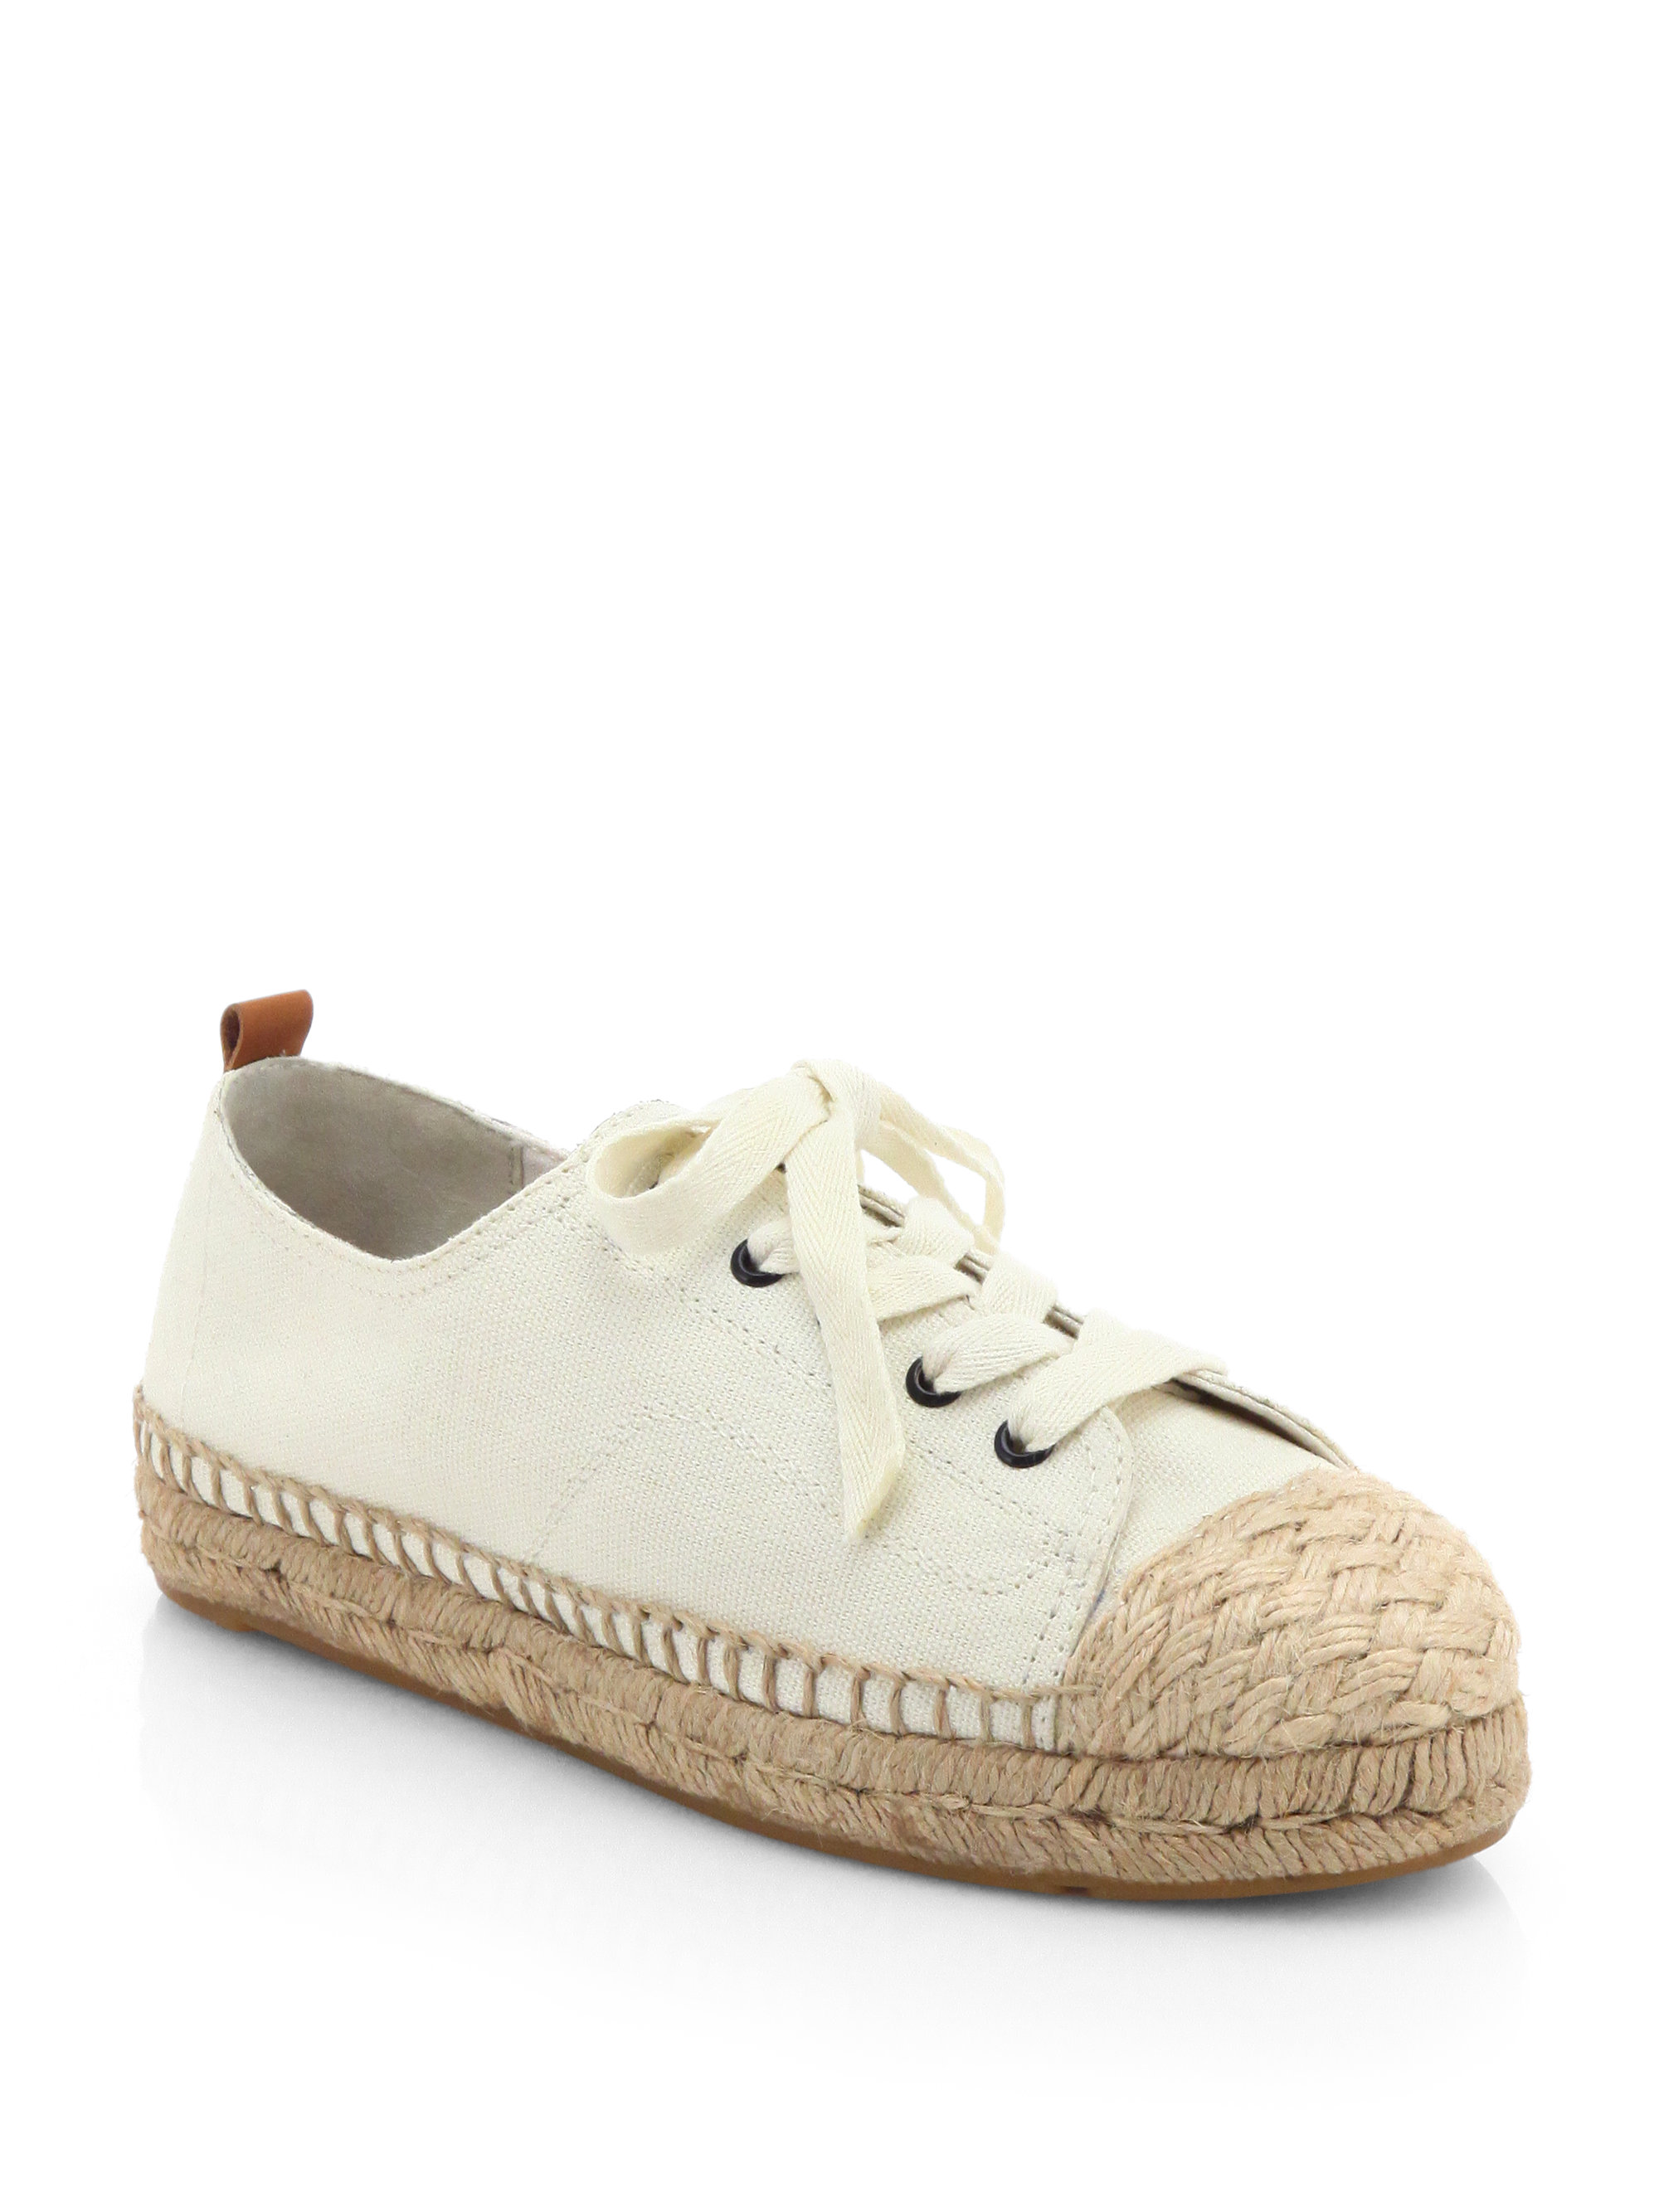 Tory Burch Carter Canvas Laceup 